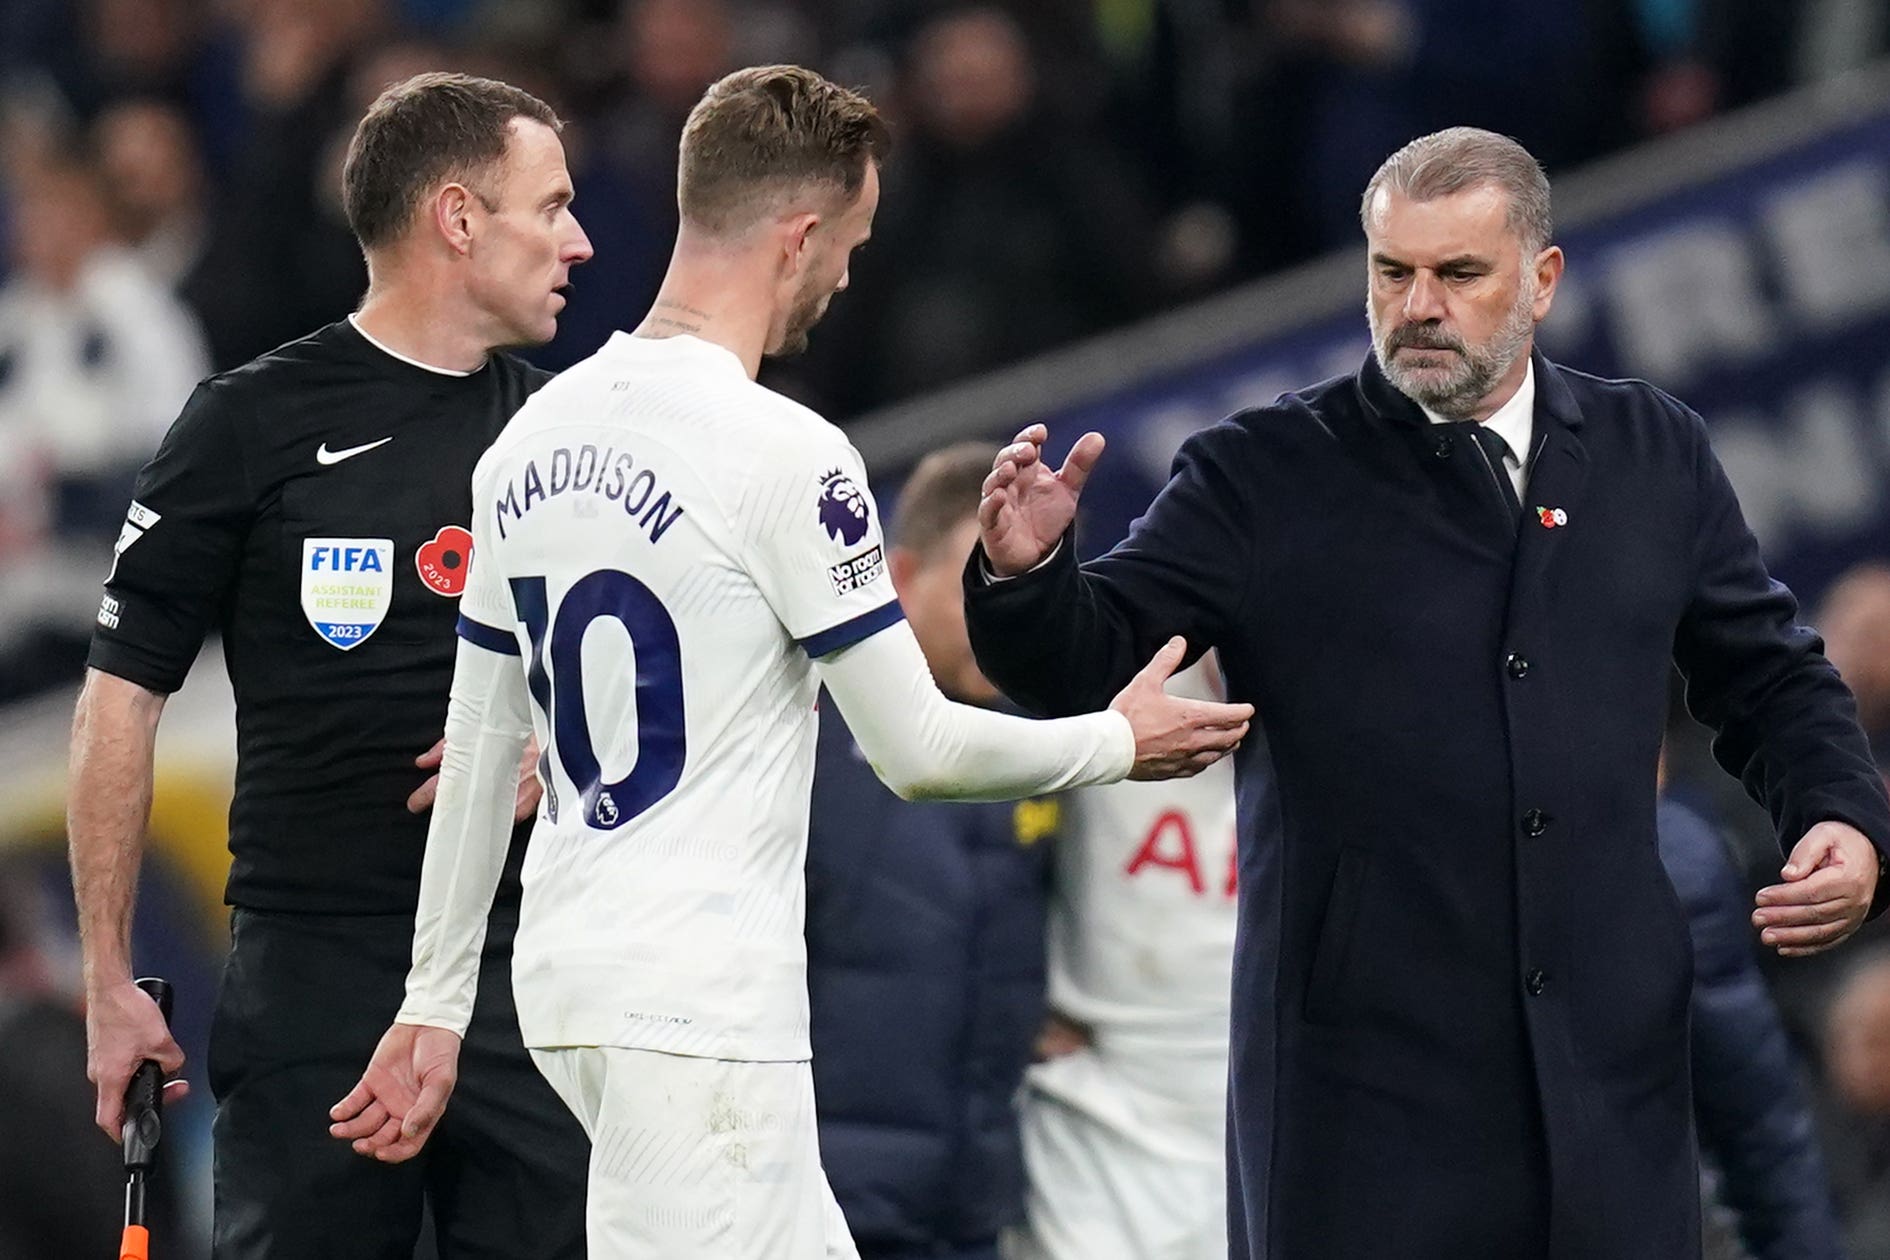 James Maddison is full of praise of manager Ange Postecoglou after Spurs beat Villa.